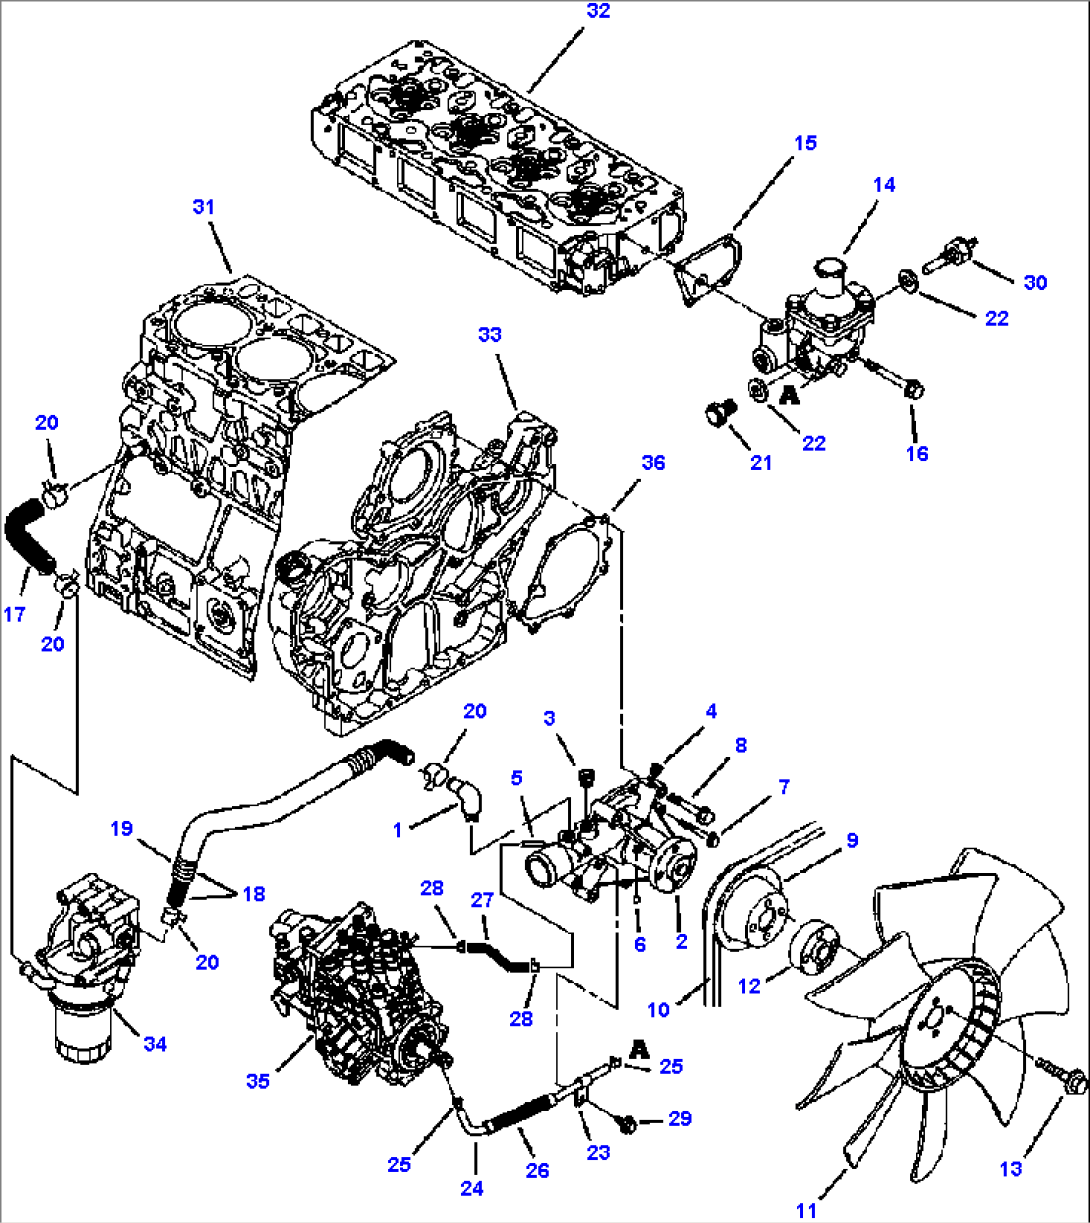 FIG. A0140-01A1 TIER II ENGINE - COOLING SYSTEM